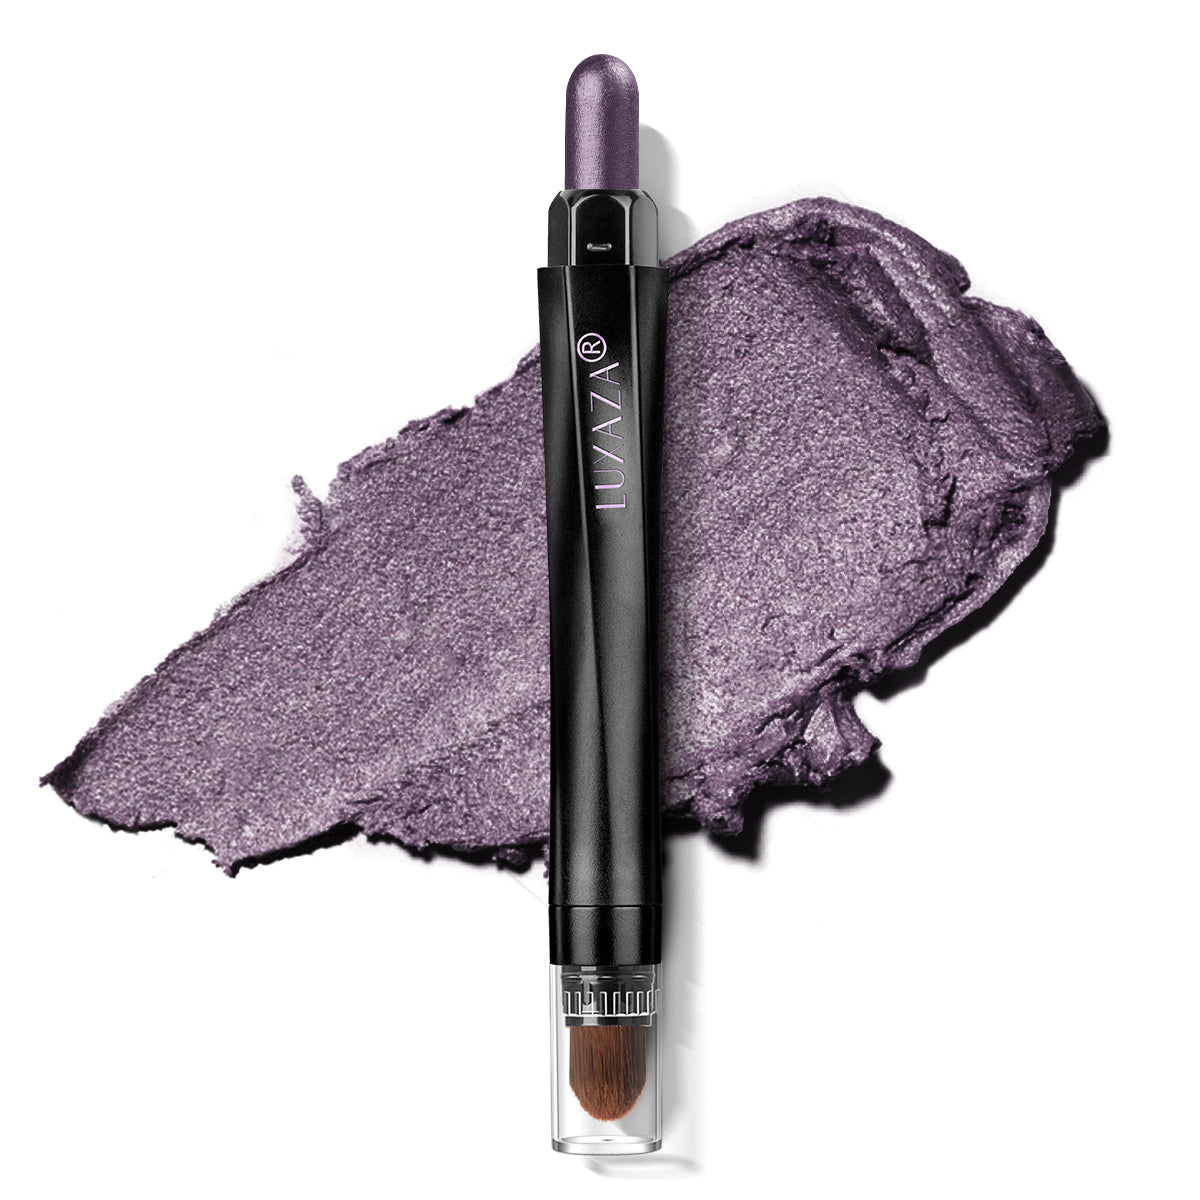 LUXAZA Magic Color Eyeshadow Stick-#167-Purple Pennant Shimmer